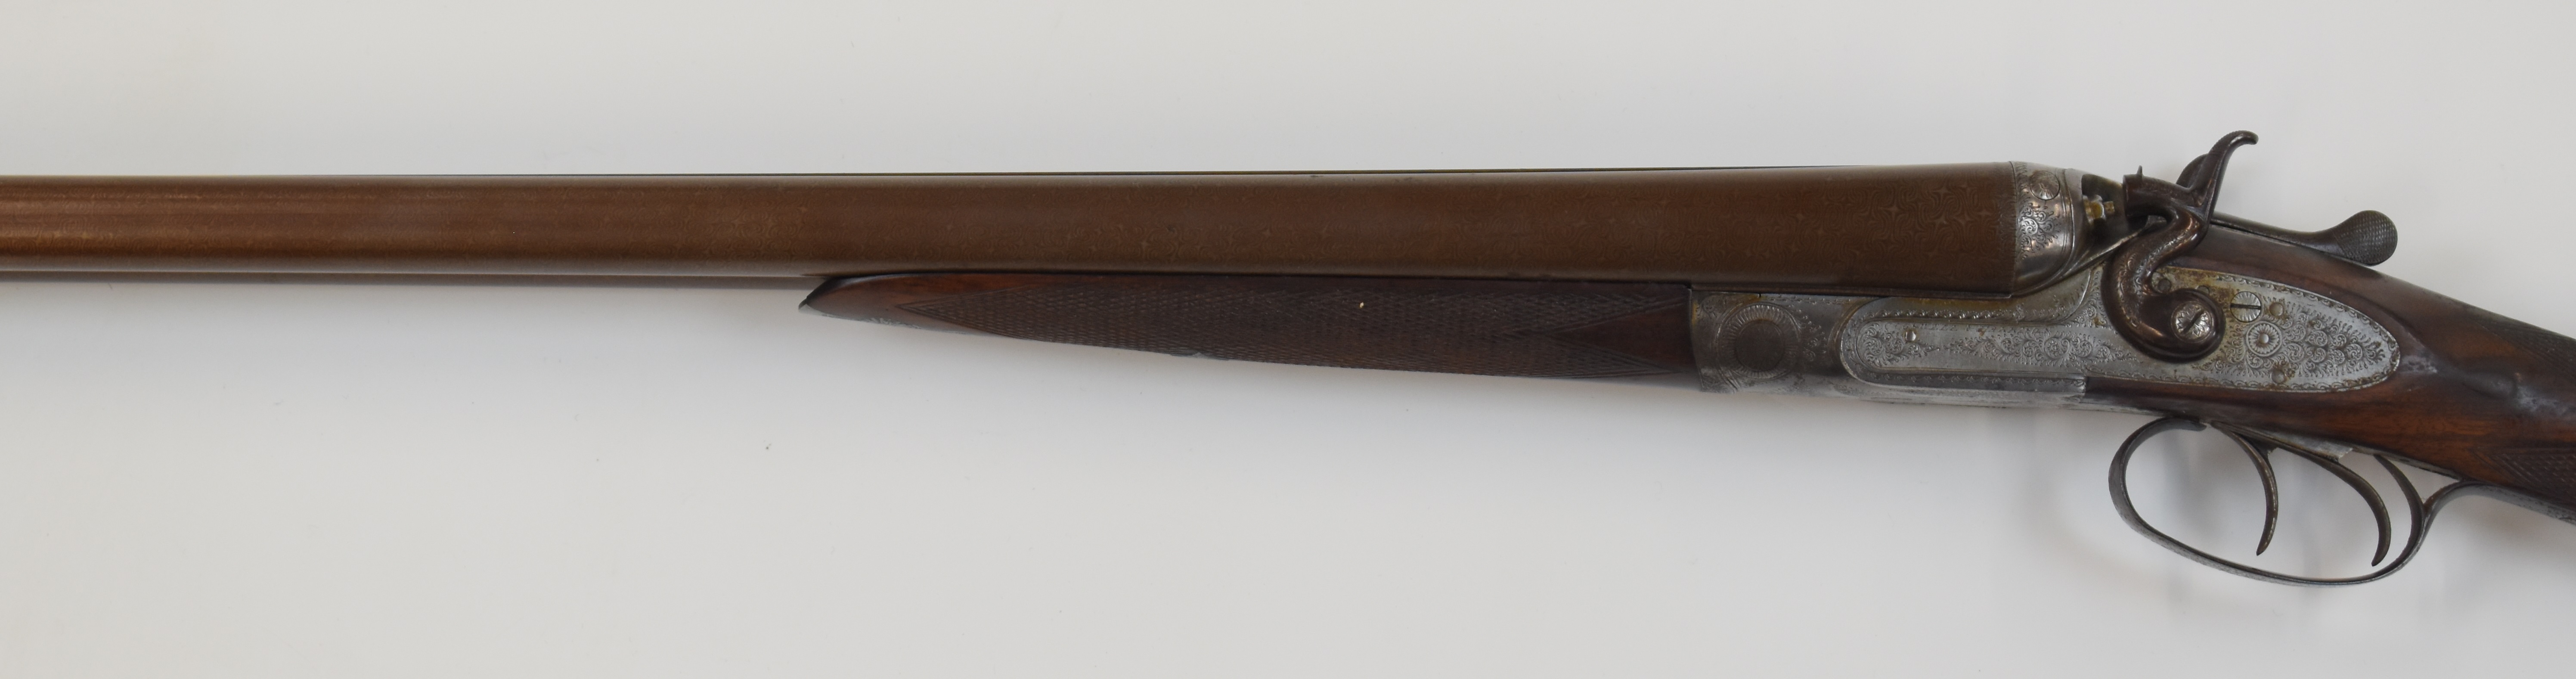 Cogswell & Harrison 12 bore side by side hammer action shotgun with named and engraved locks, - Image 12 of 12